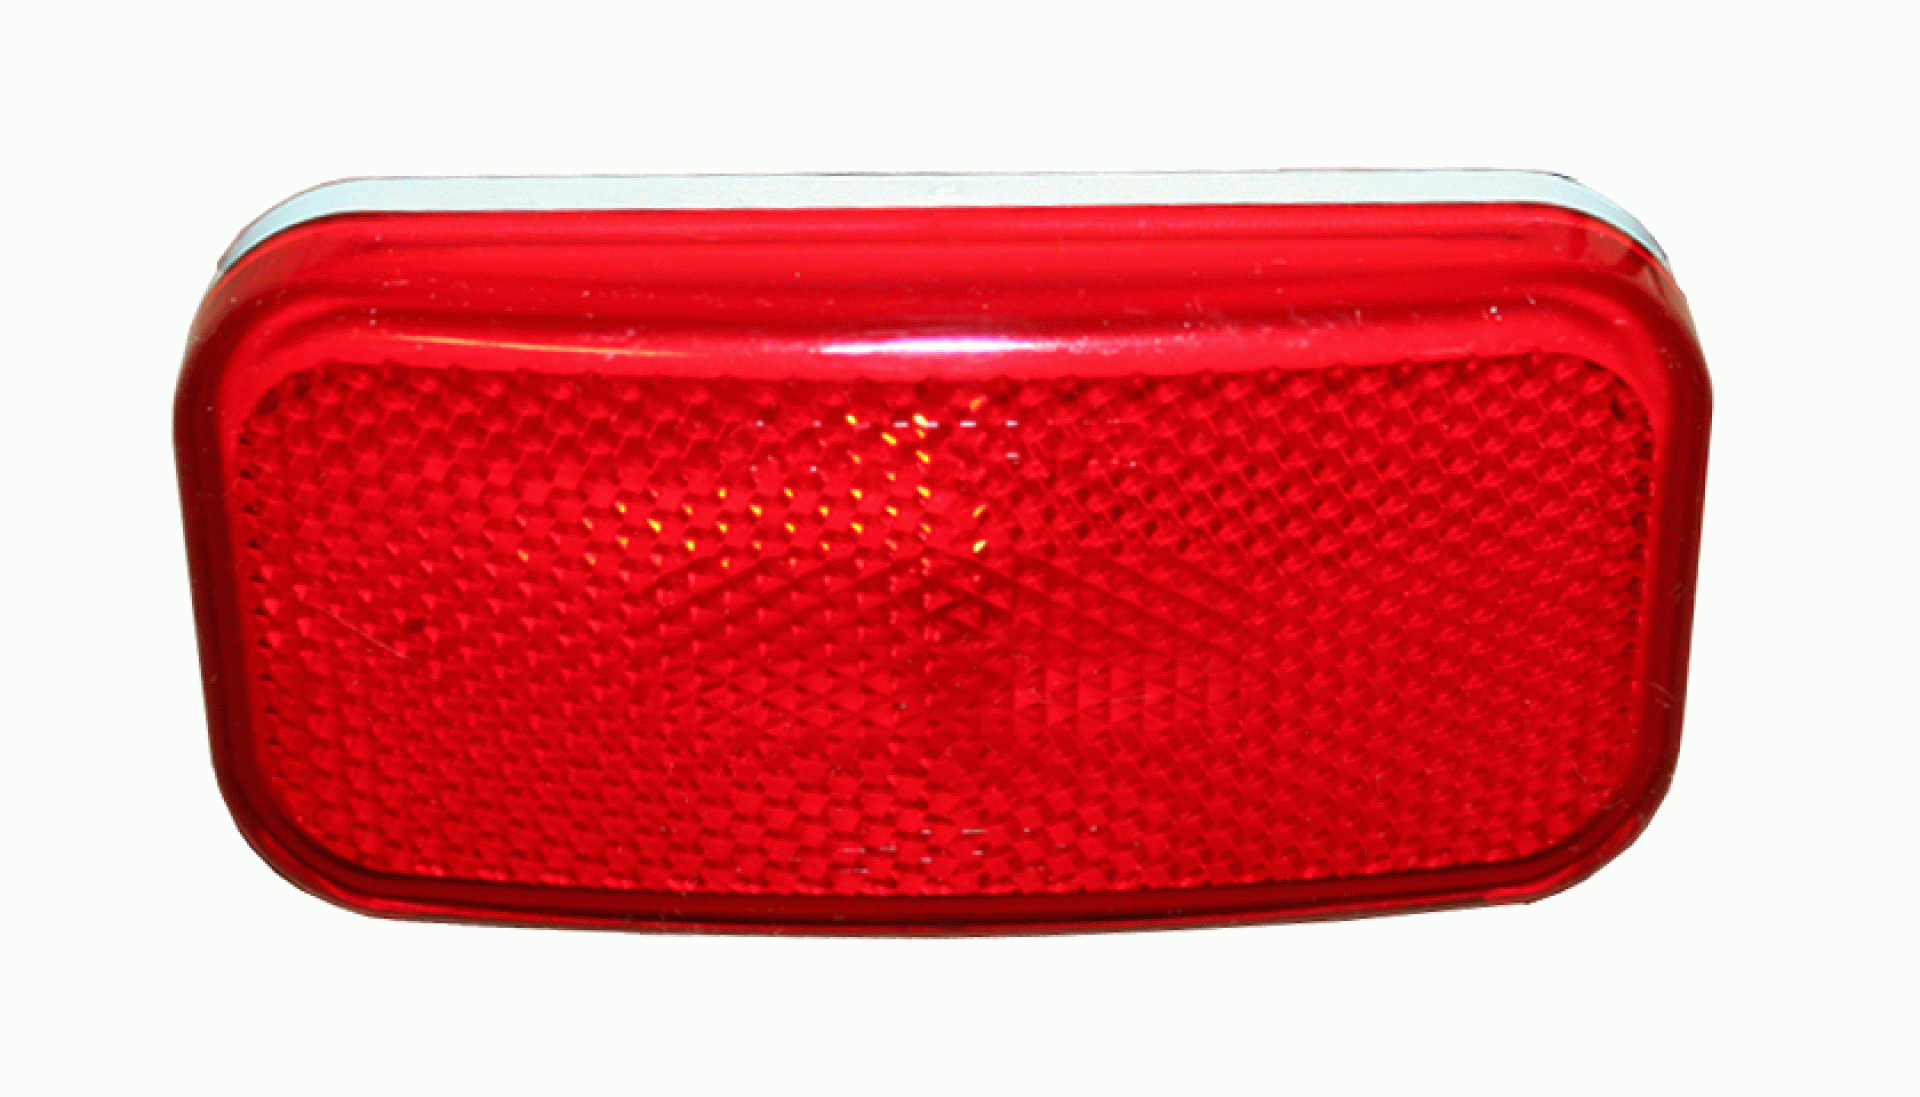 FASTENERS UNLIMITED | CMD-003-58 | CLEARANCE LIGHT - RED